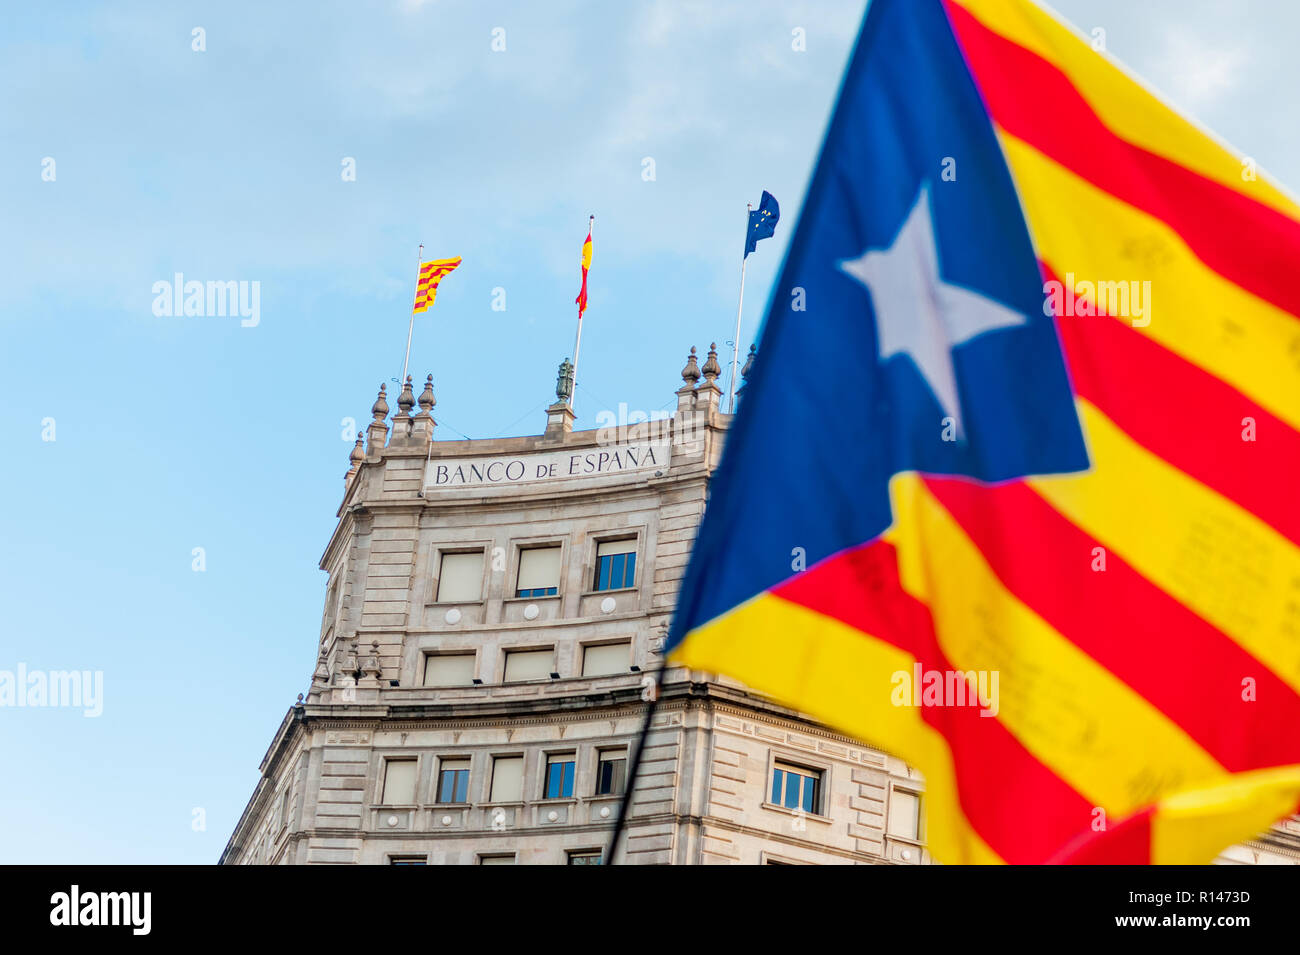 catalan flag waving in front of bank of spain building in barcelona city center during indepence march symbol of economic issue Stock Photo